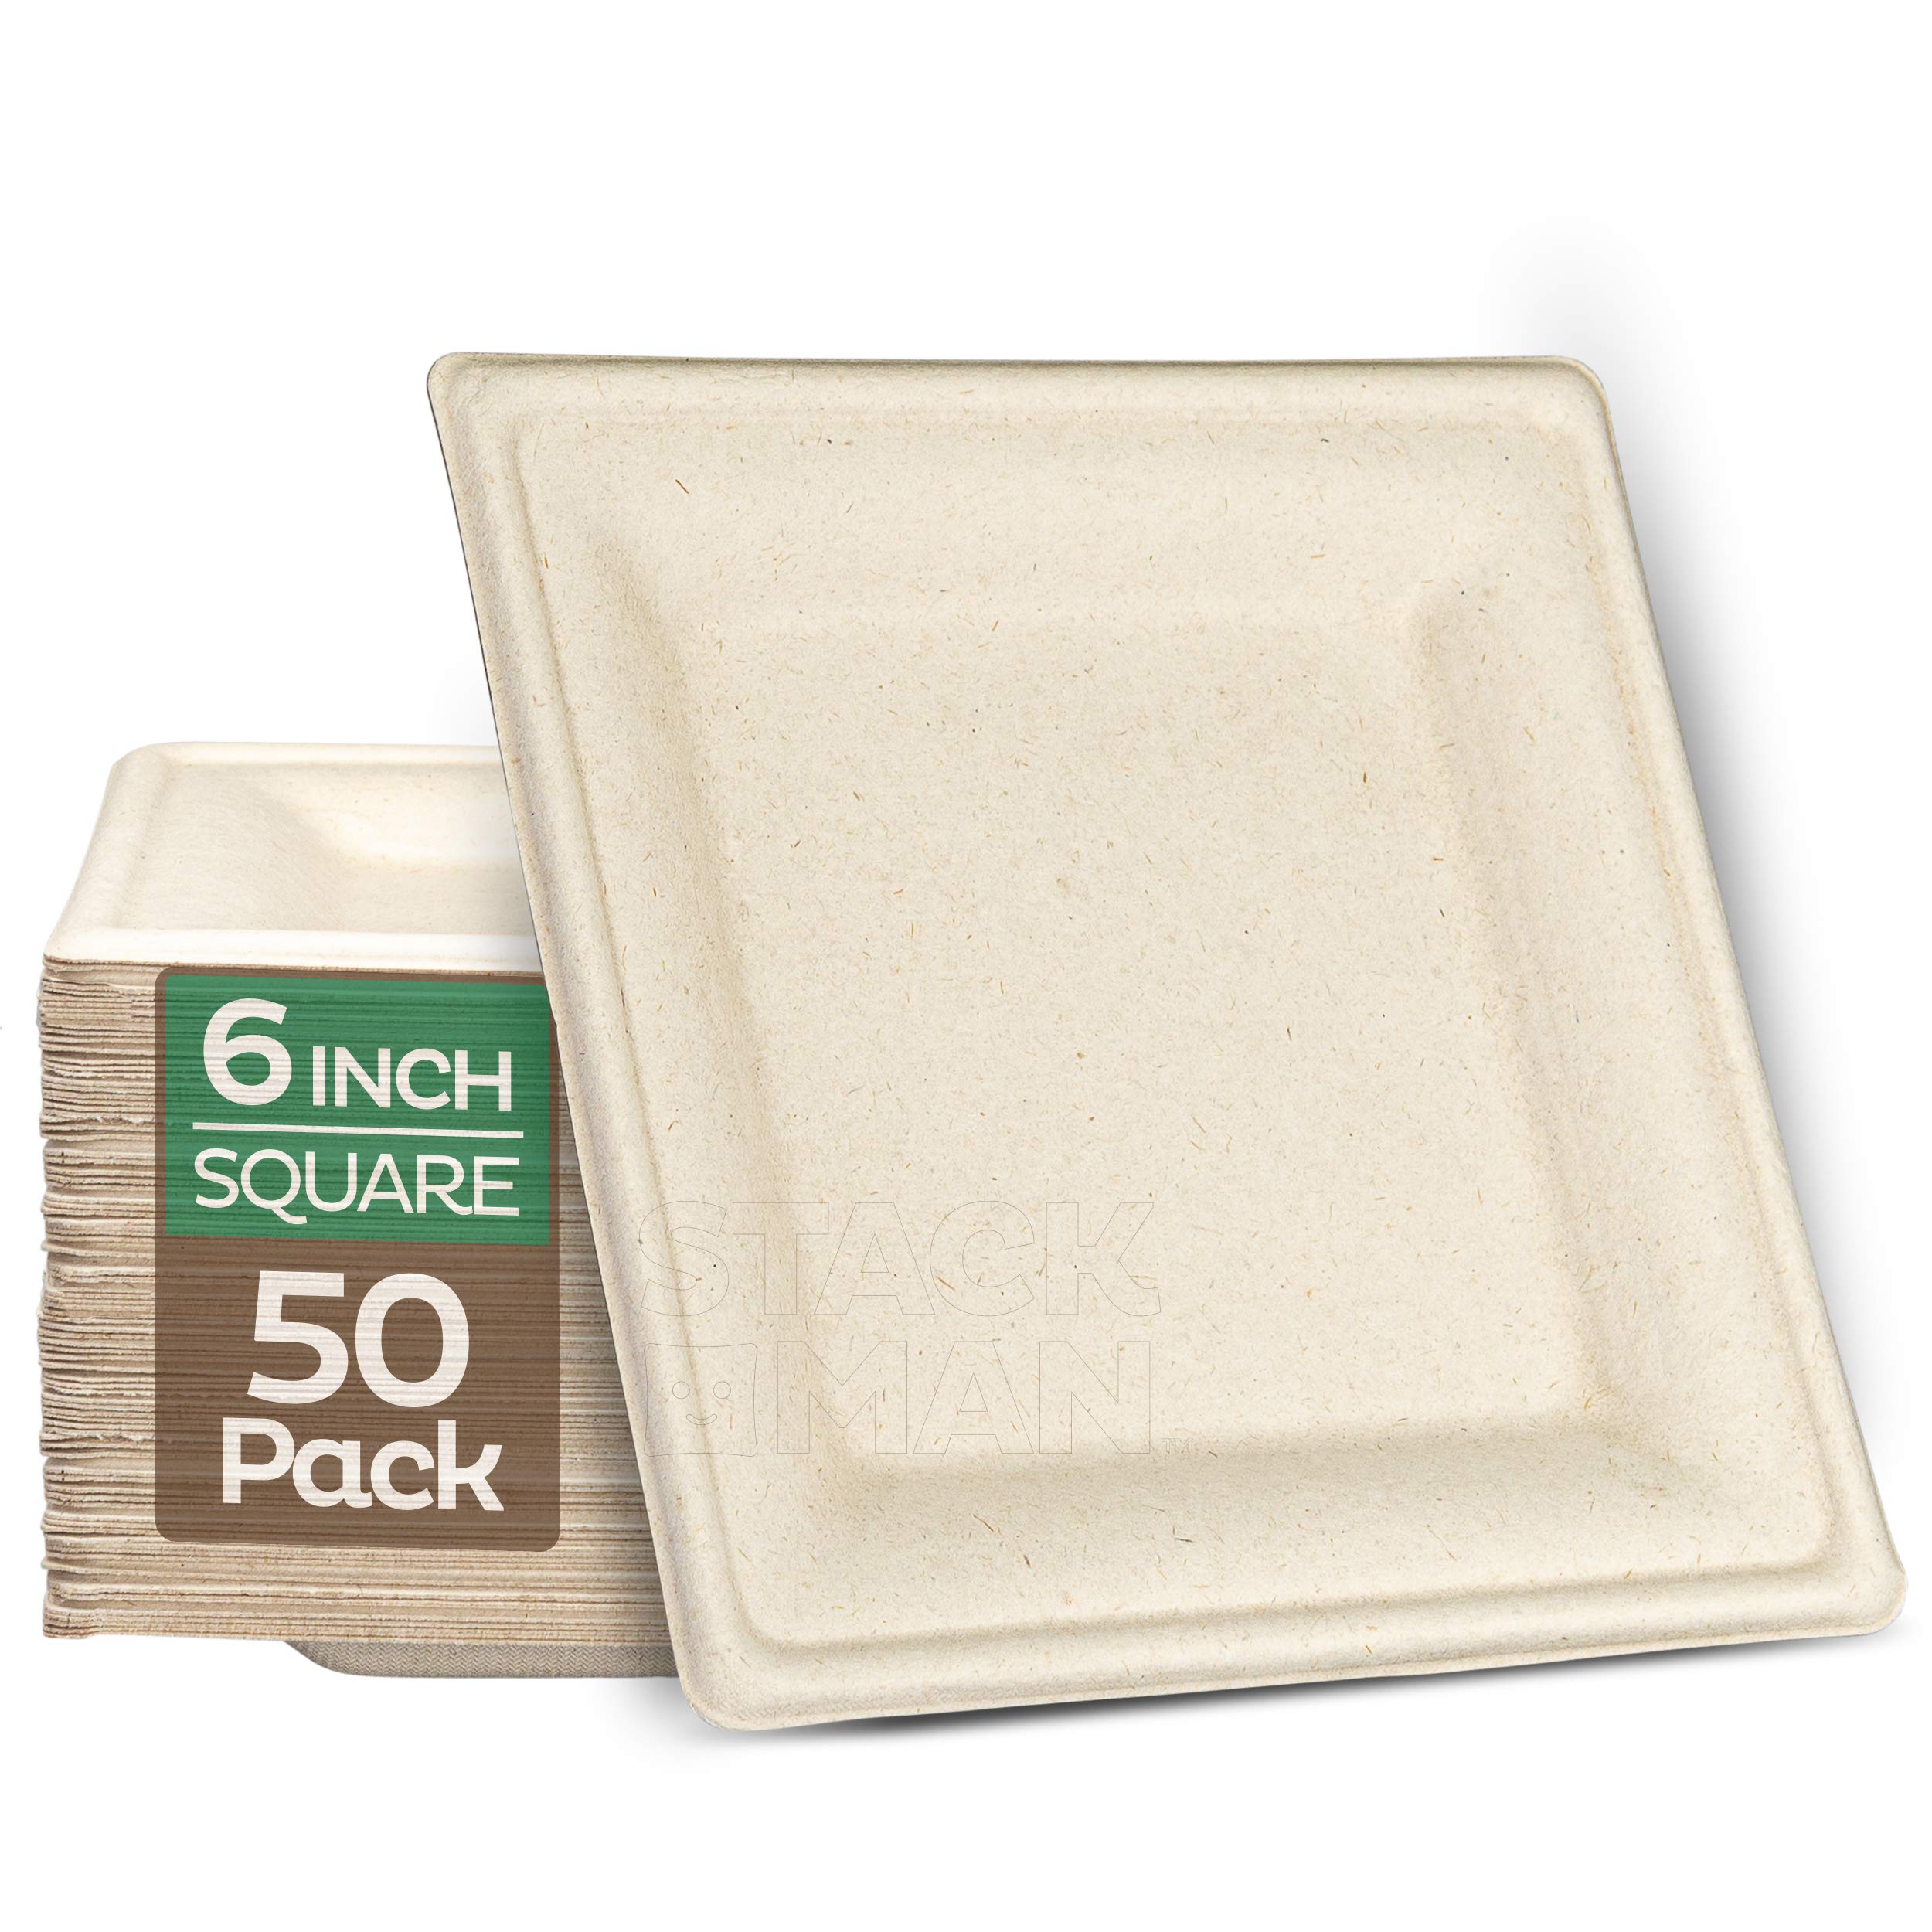 100% Compostable 6 inch Paper Plates, Heavy Duty Paper Plates